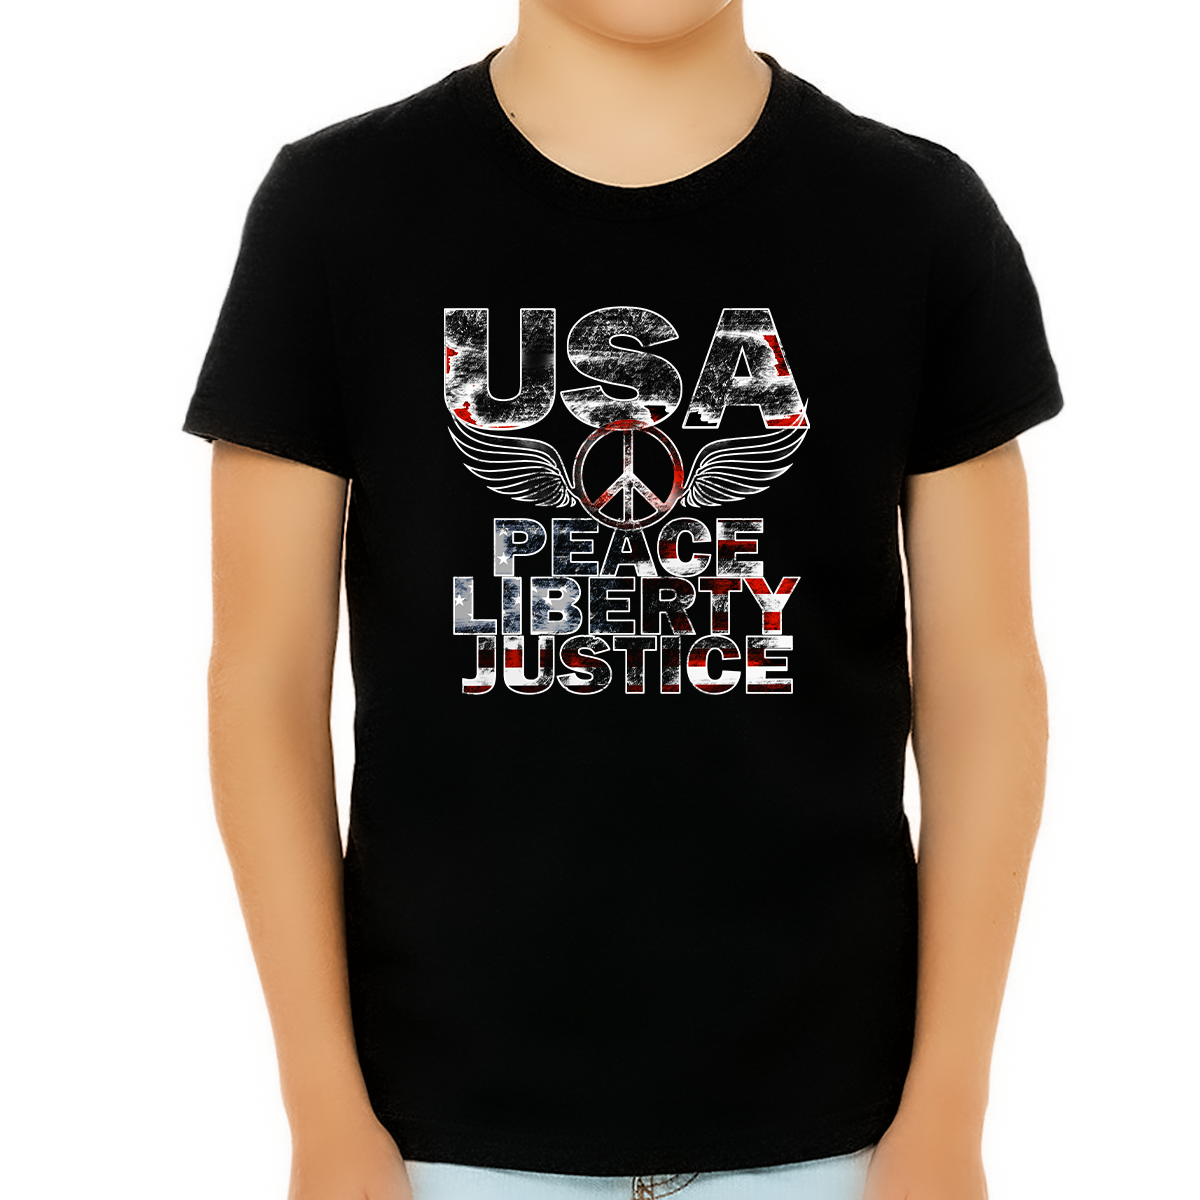 4th of July Shirts for Boys Patriotic Shirts for Boys Peace Liberty Justice Black American Flag Shirt - Fire Fit Designs